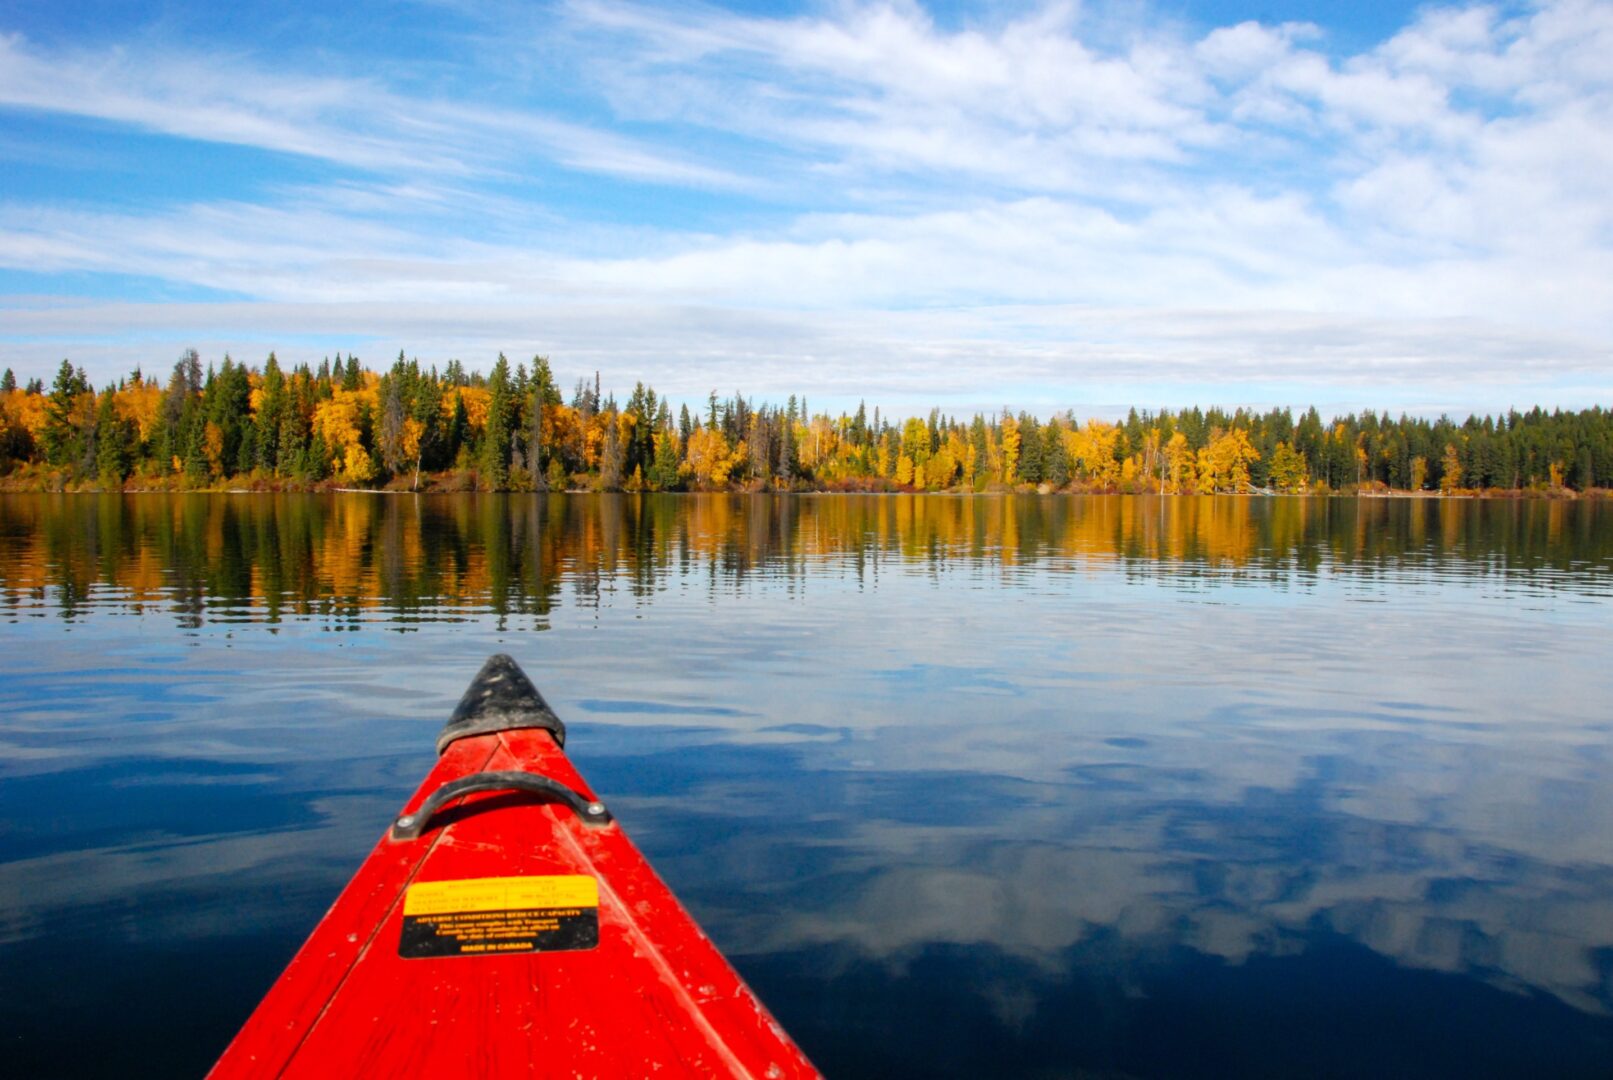 The nose of a red kayak wades out into blue water. Trees with autumn colours stand on the distant shore.